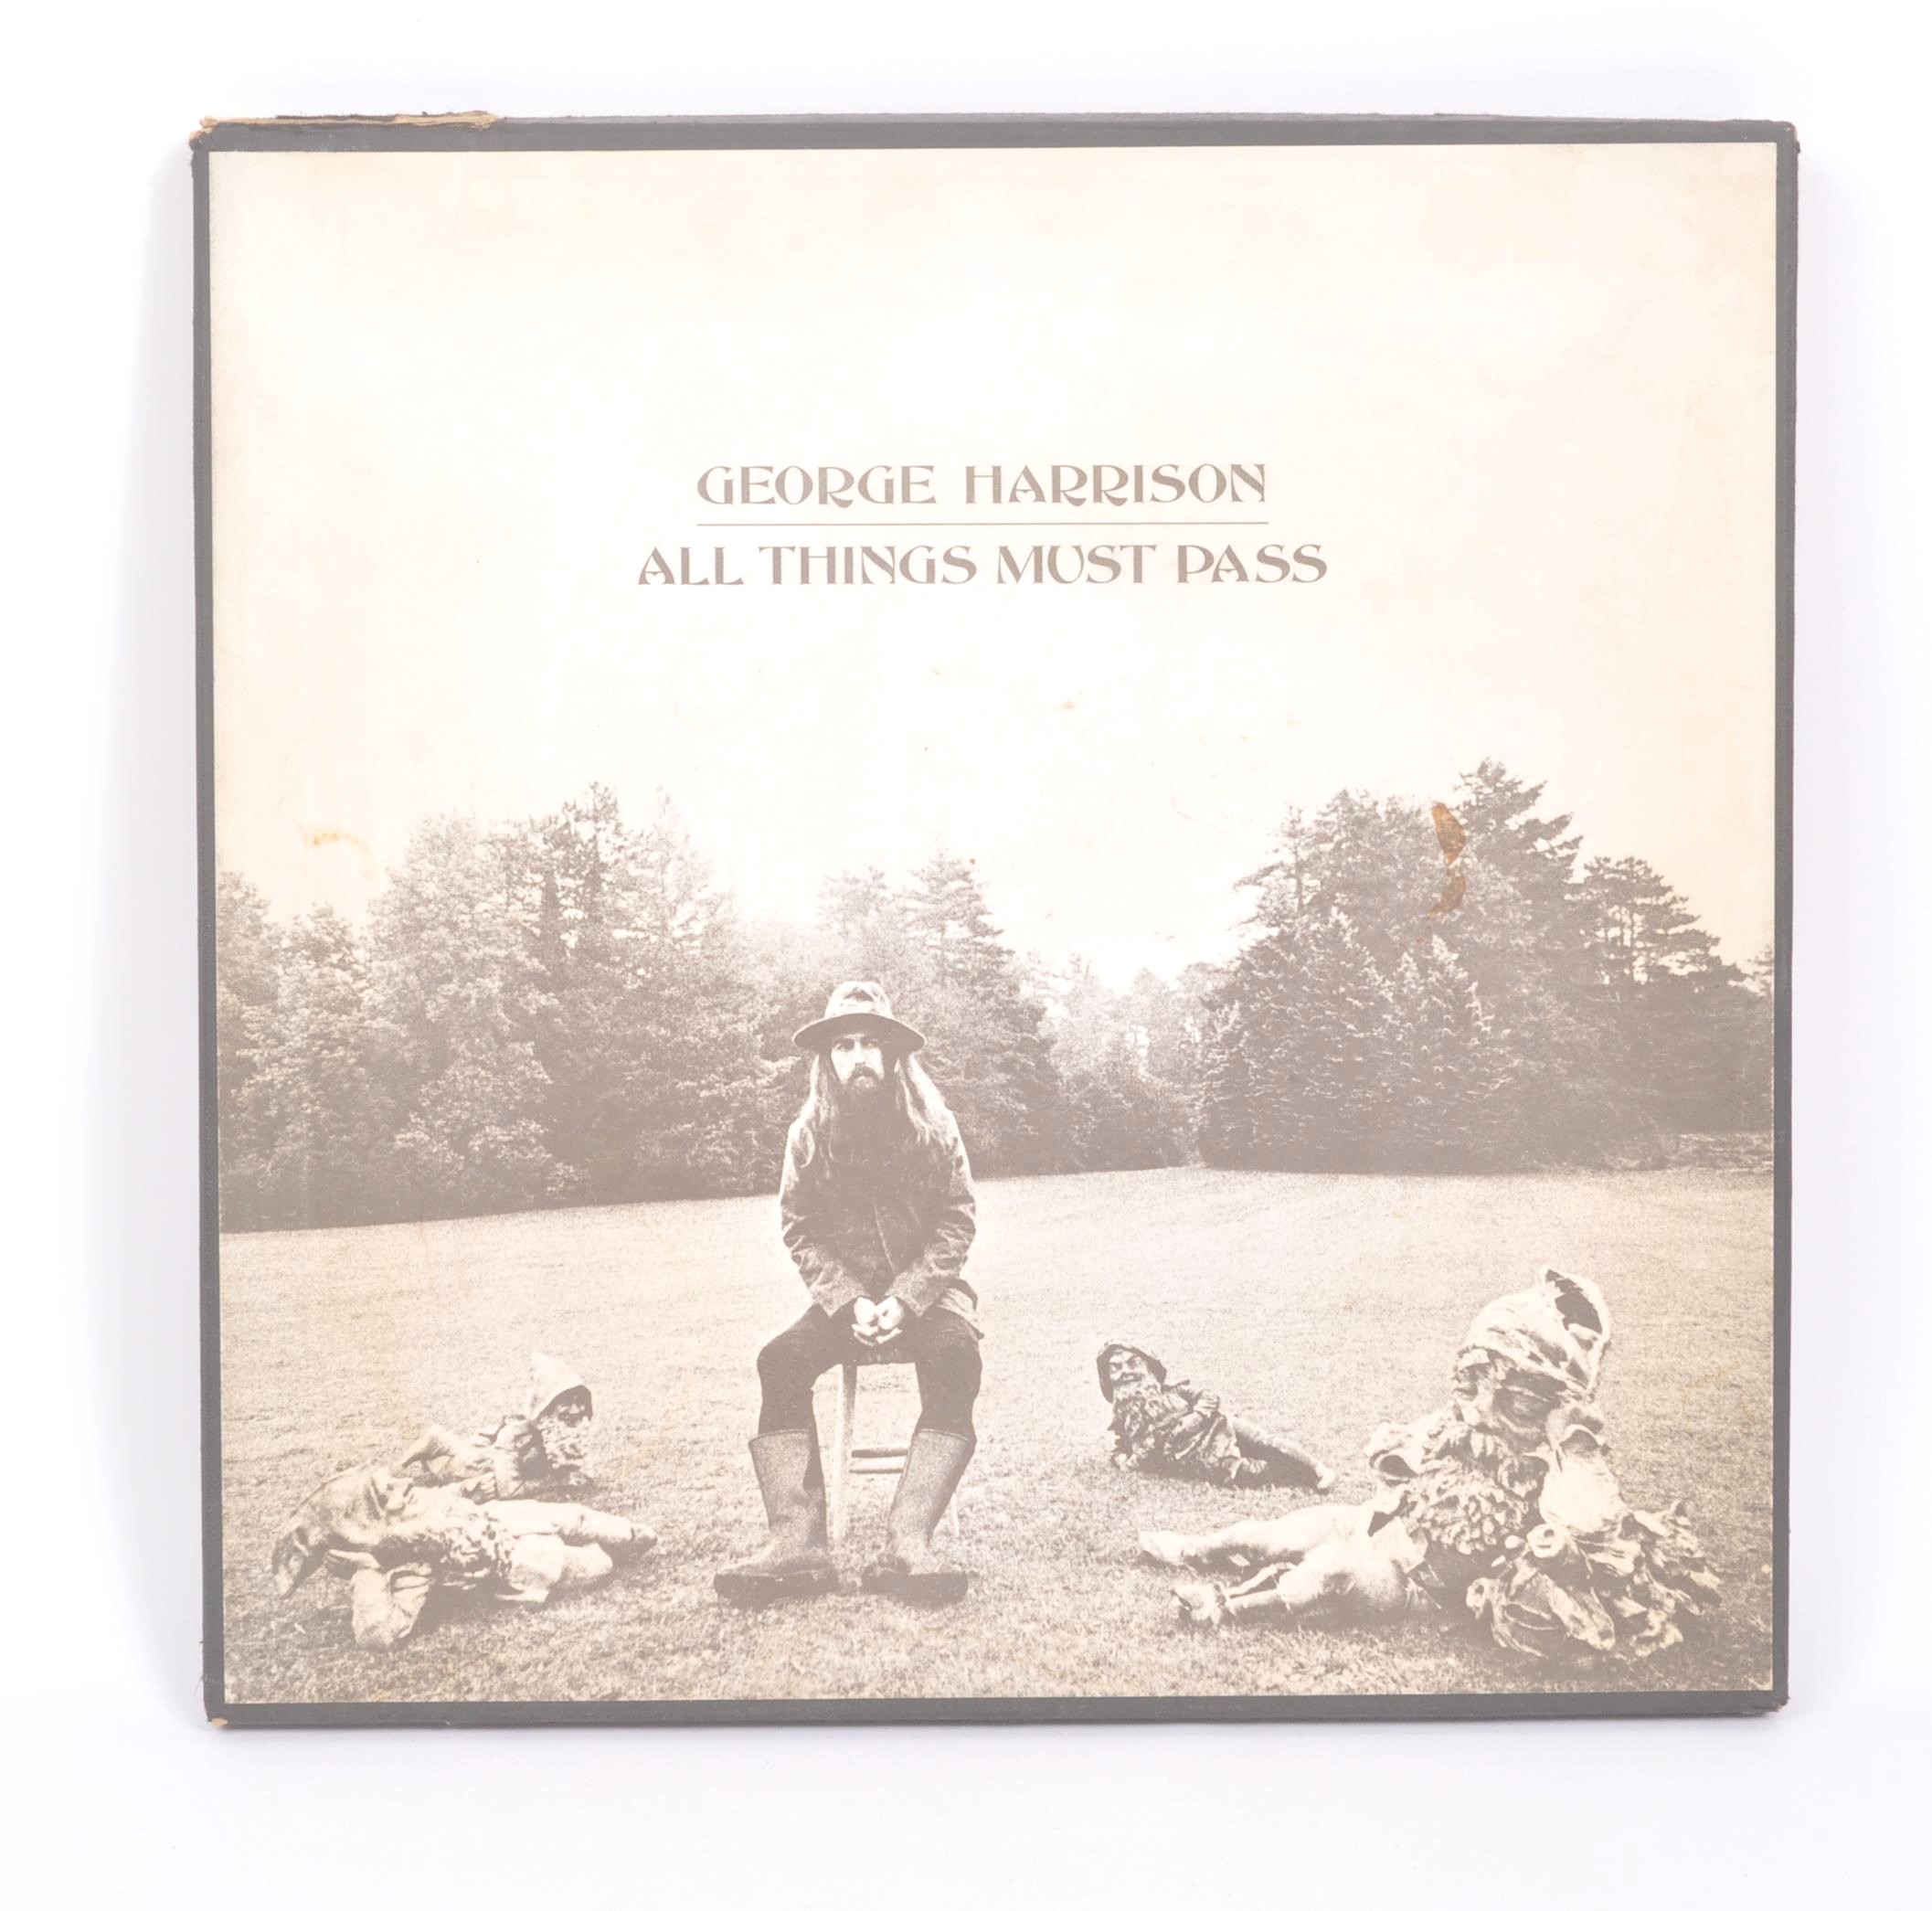 GEORGE HARRISON - ALL THINGS MUST PASS LP VINYL RECORD